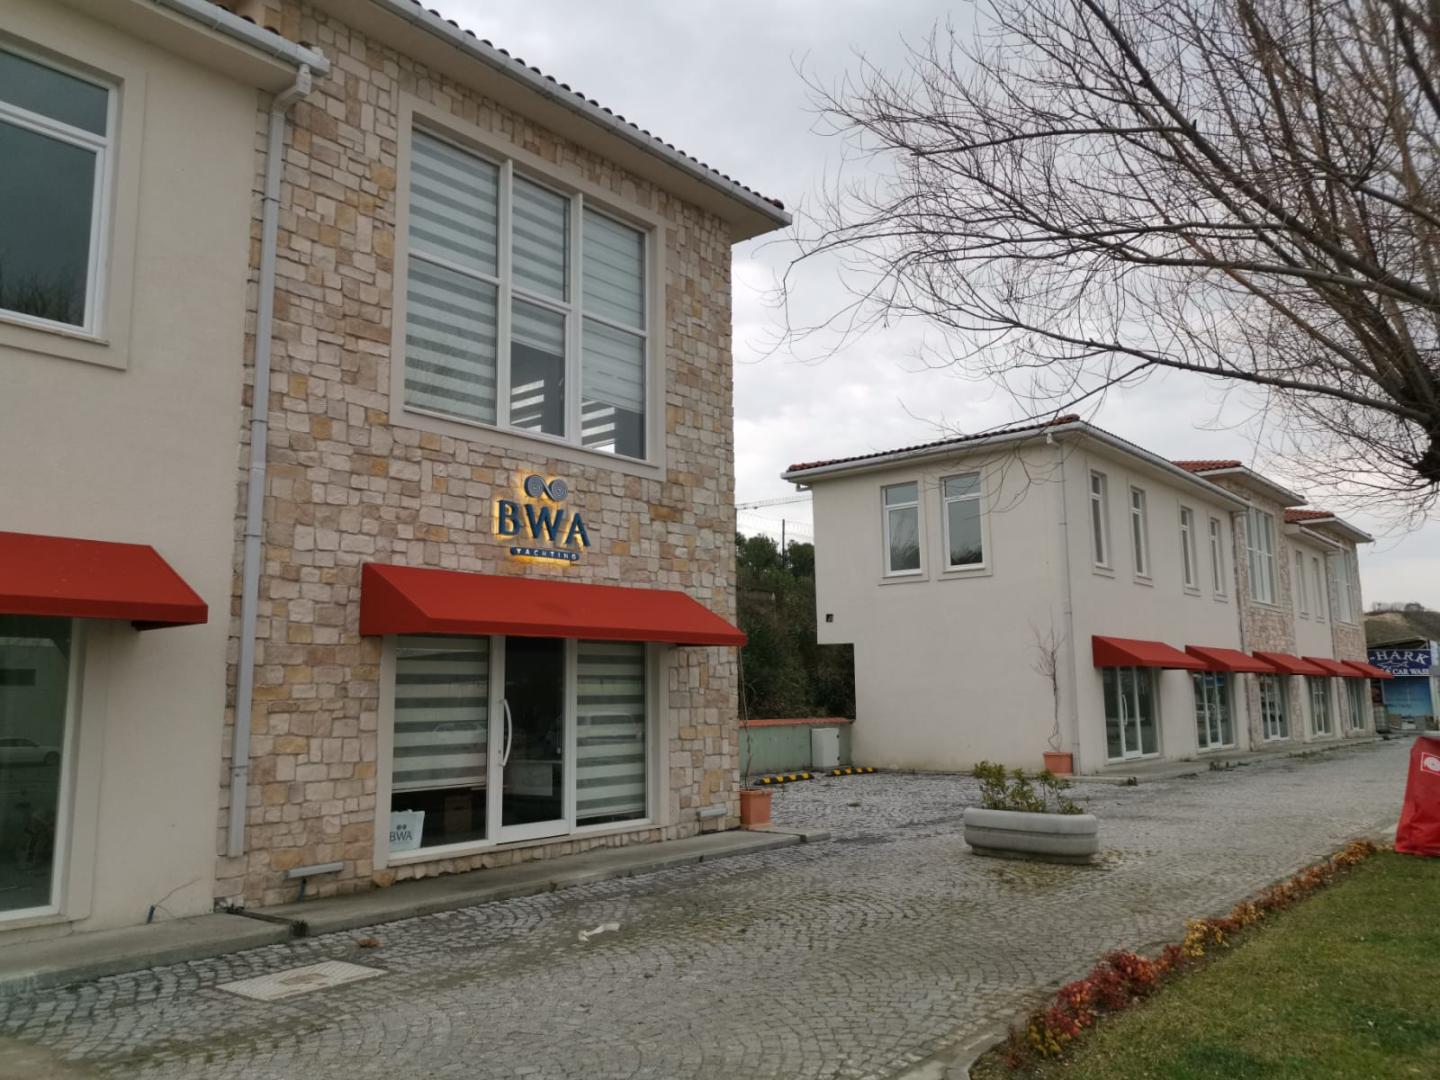 New West Istanbul Marina office for BWA Yachting Turkey